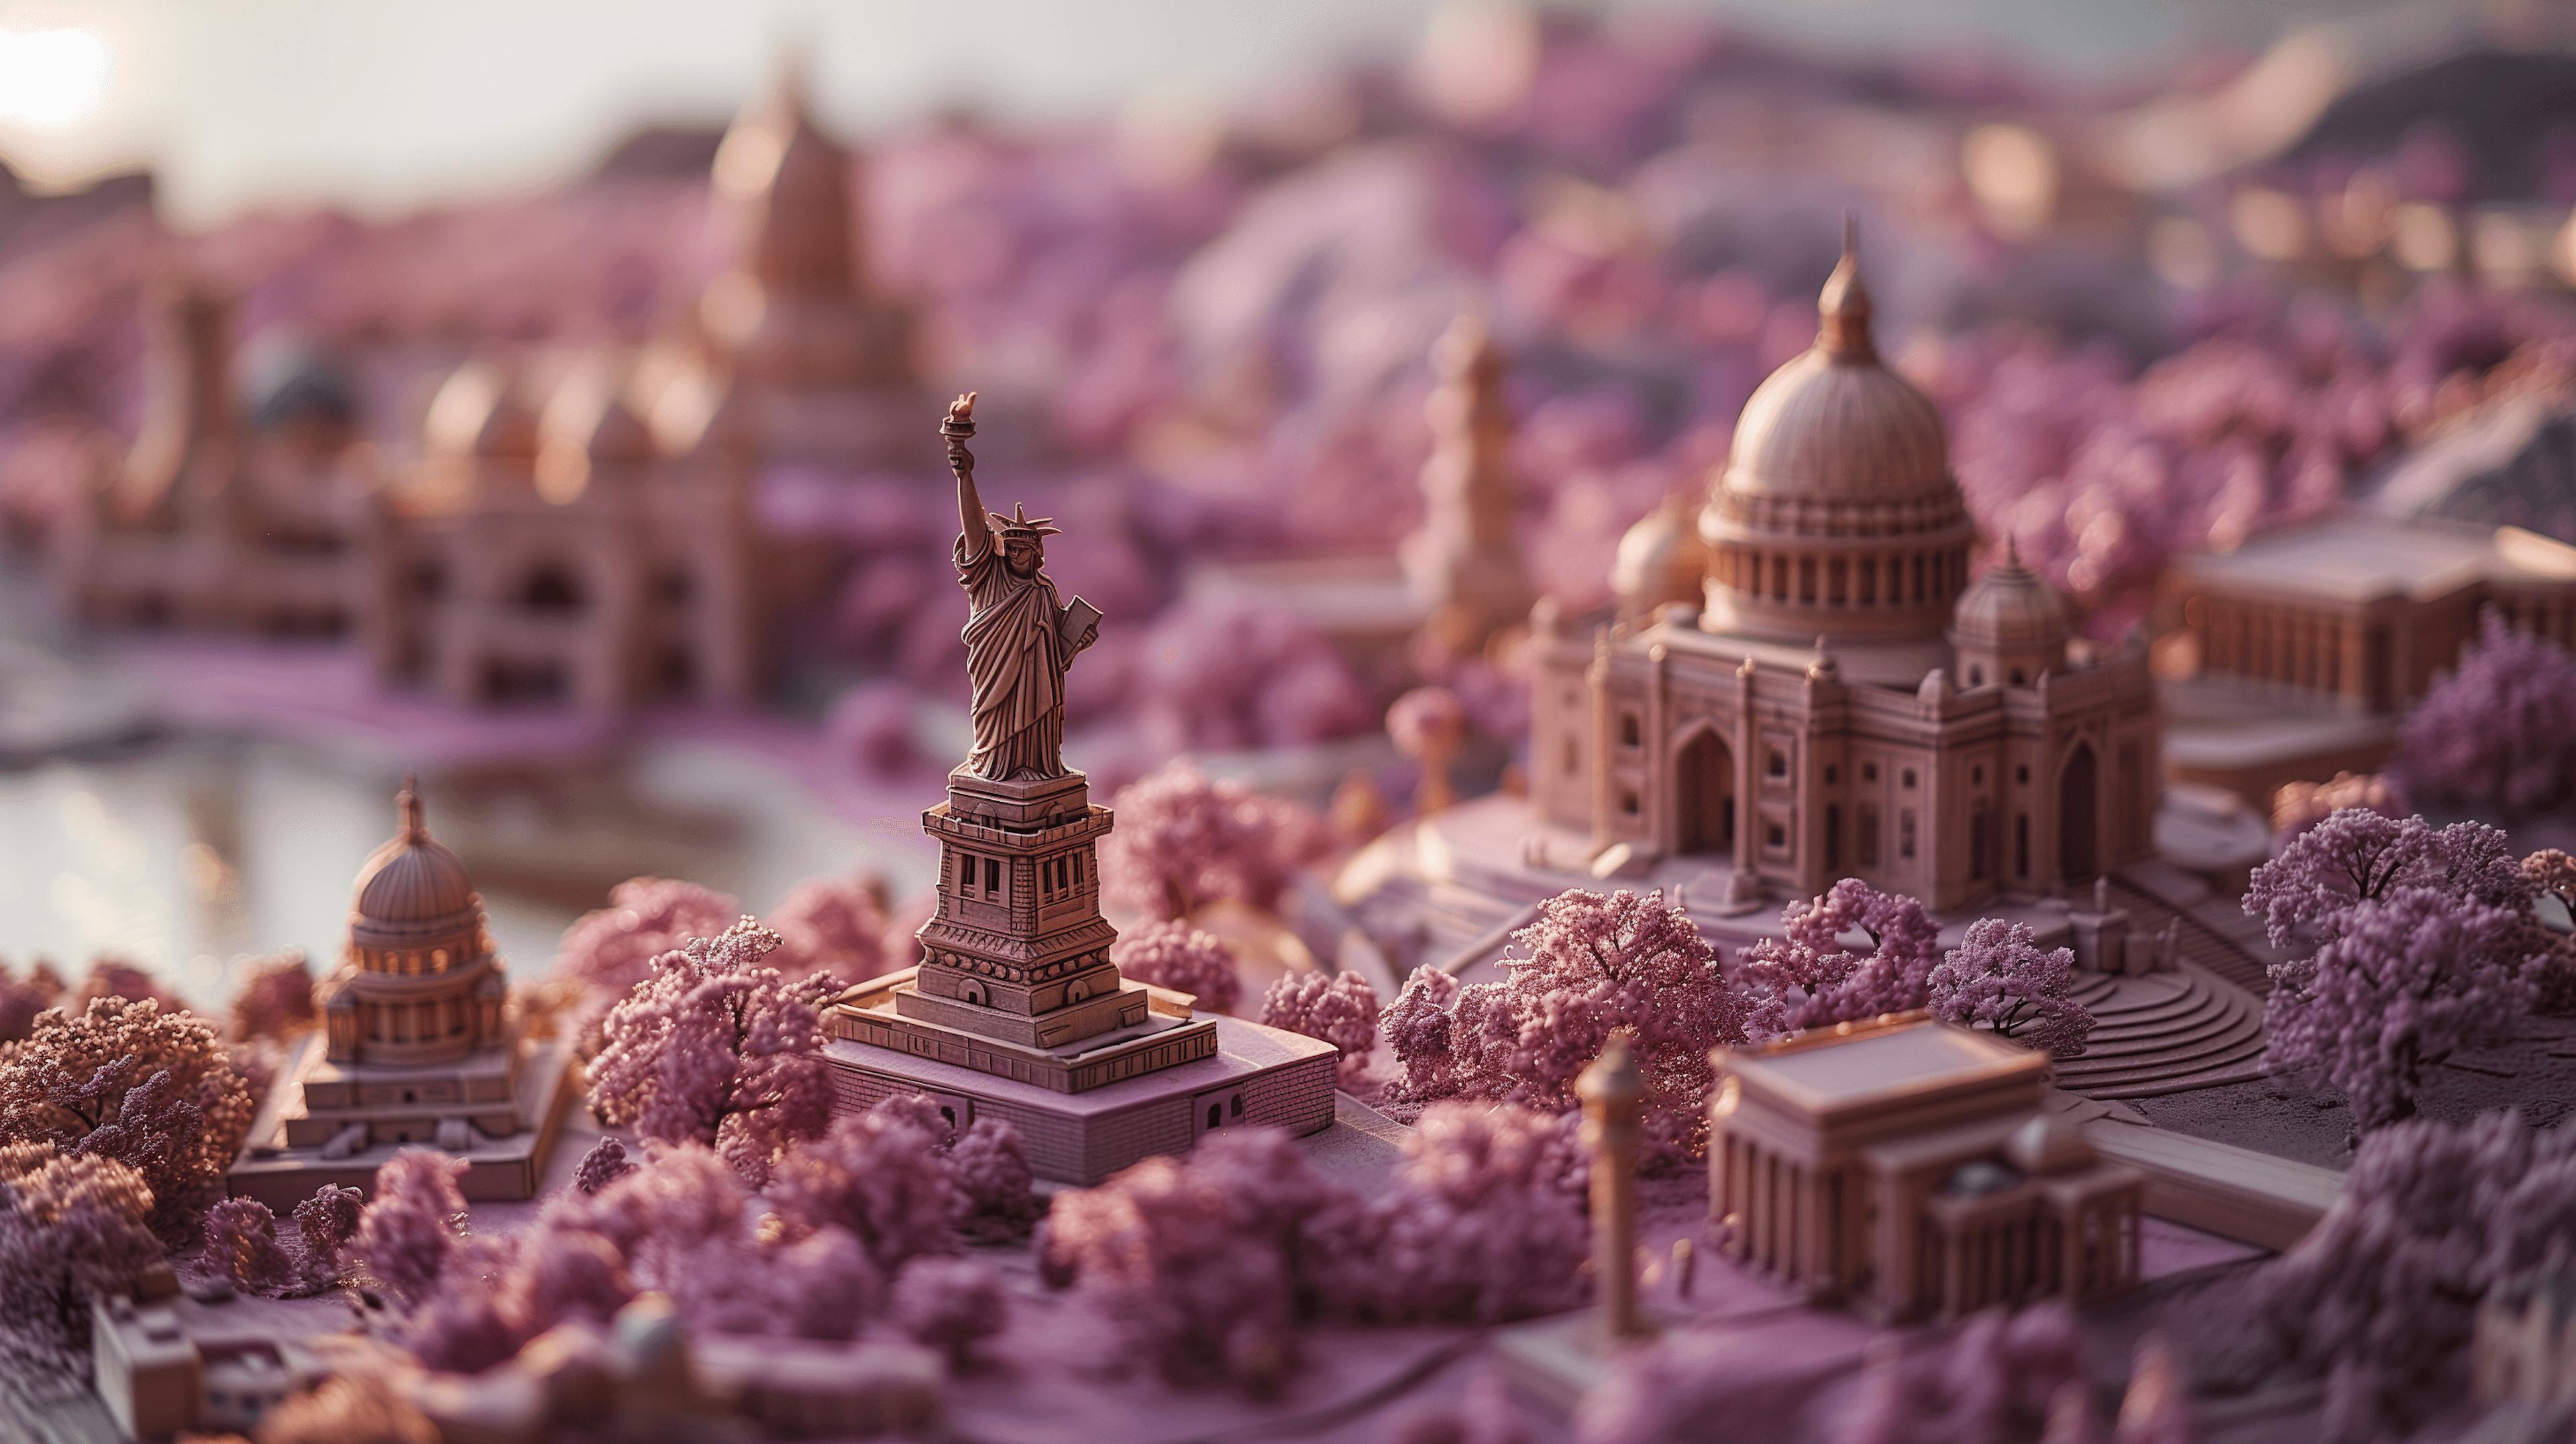 3d images of a purple landscape surrounding the city, in the style of miniature sculptures